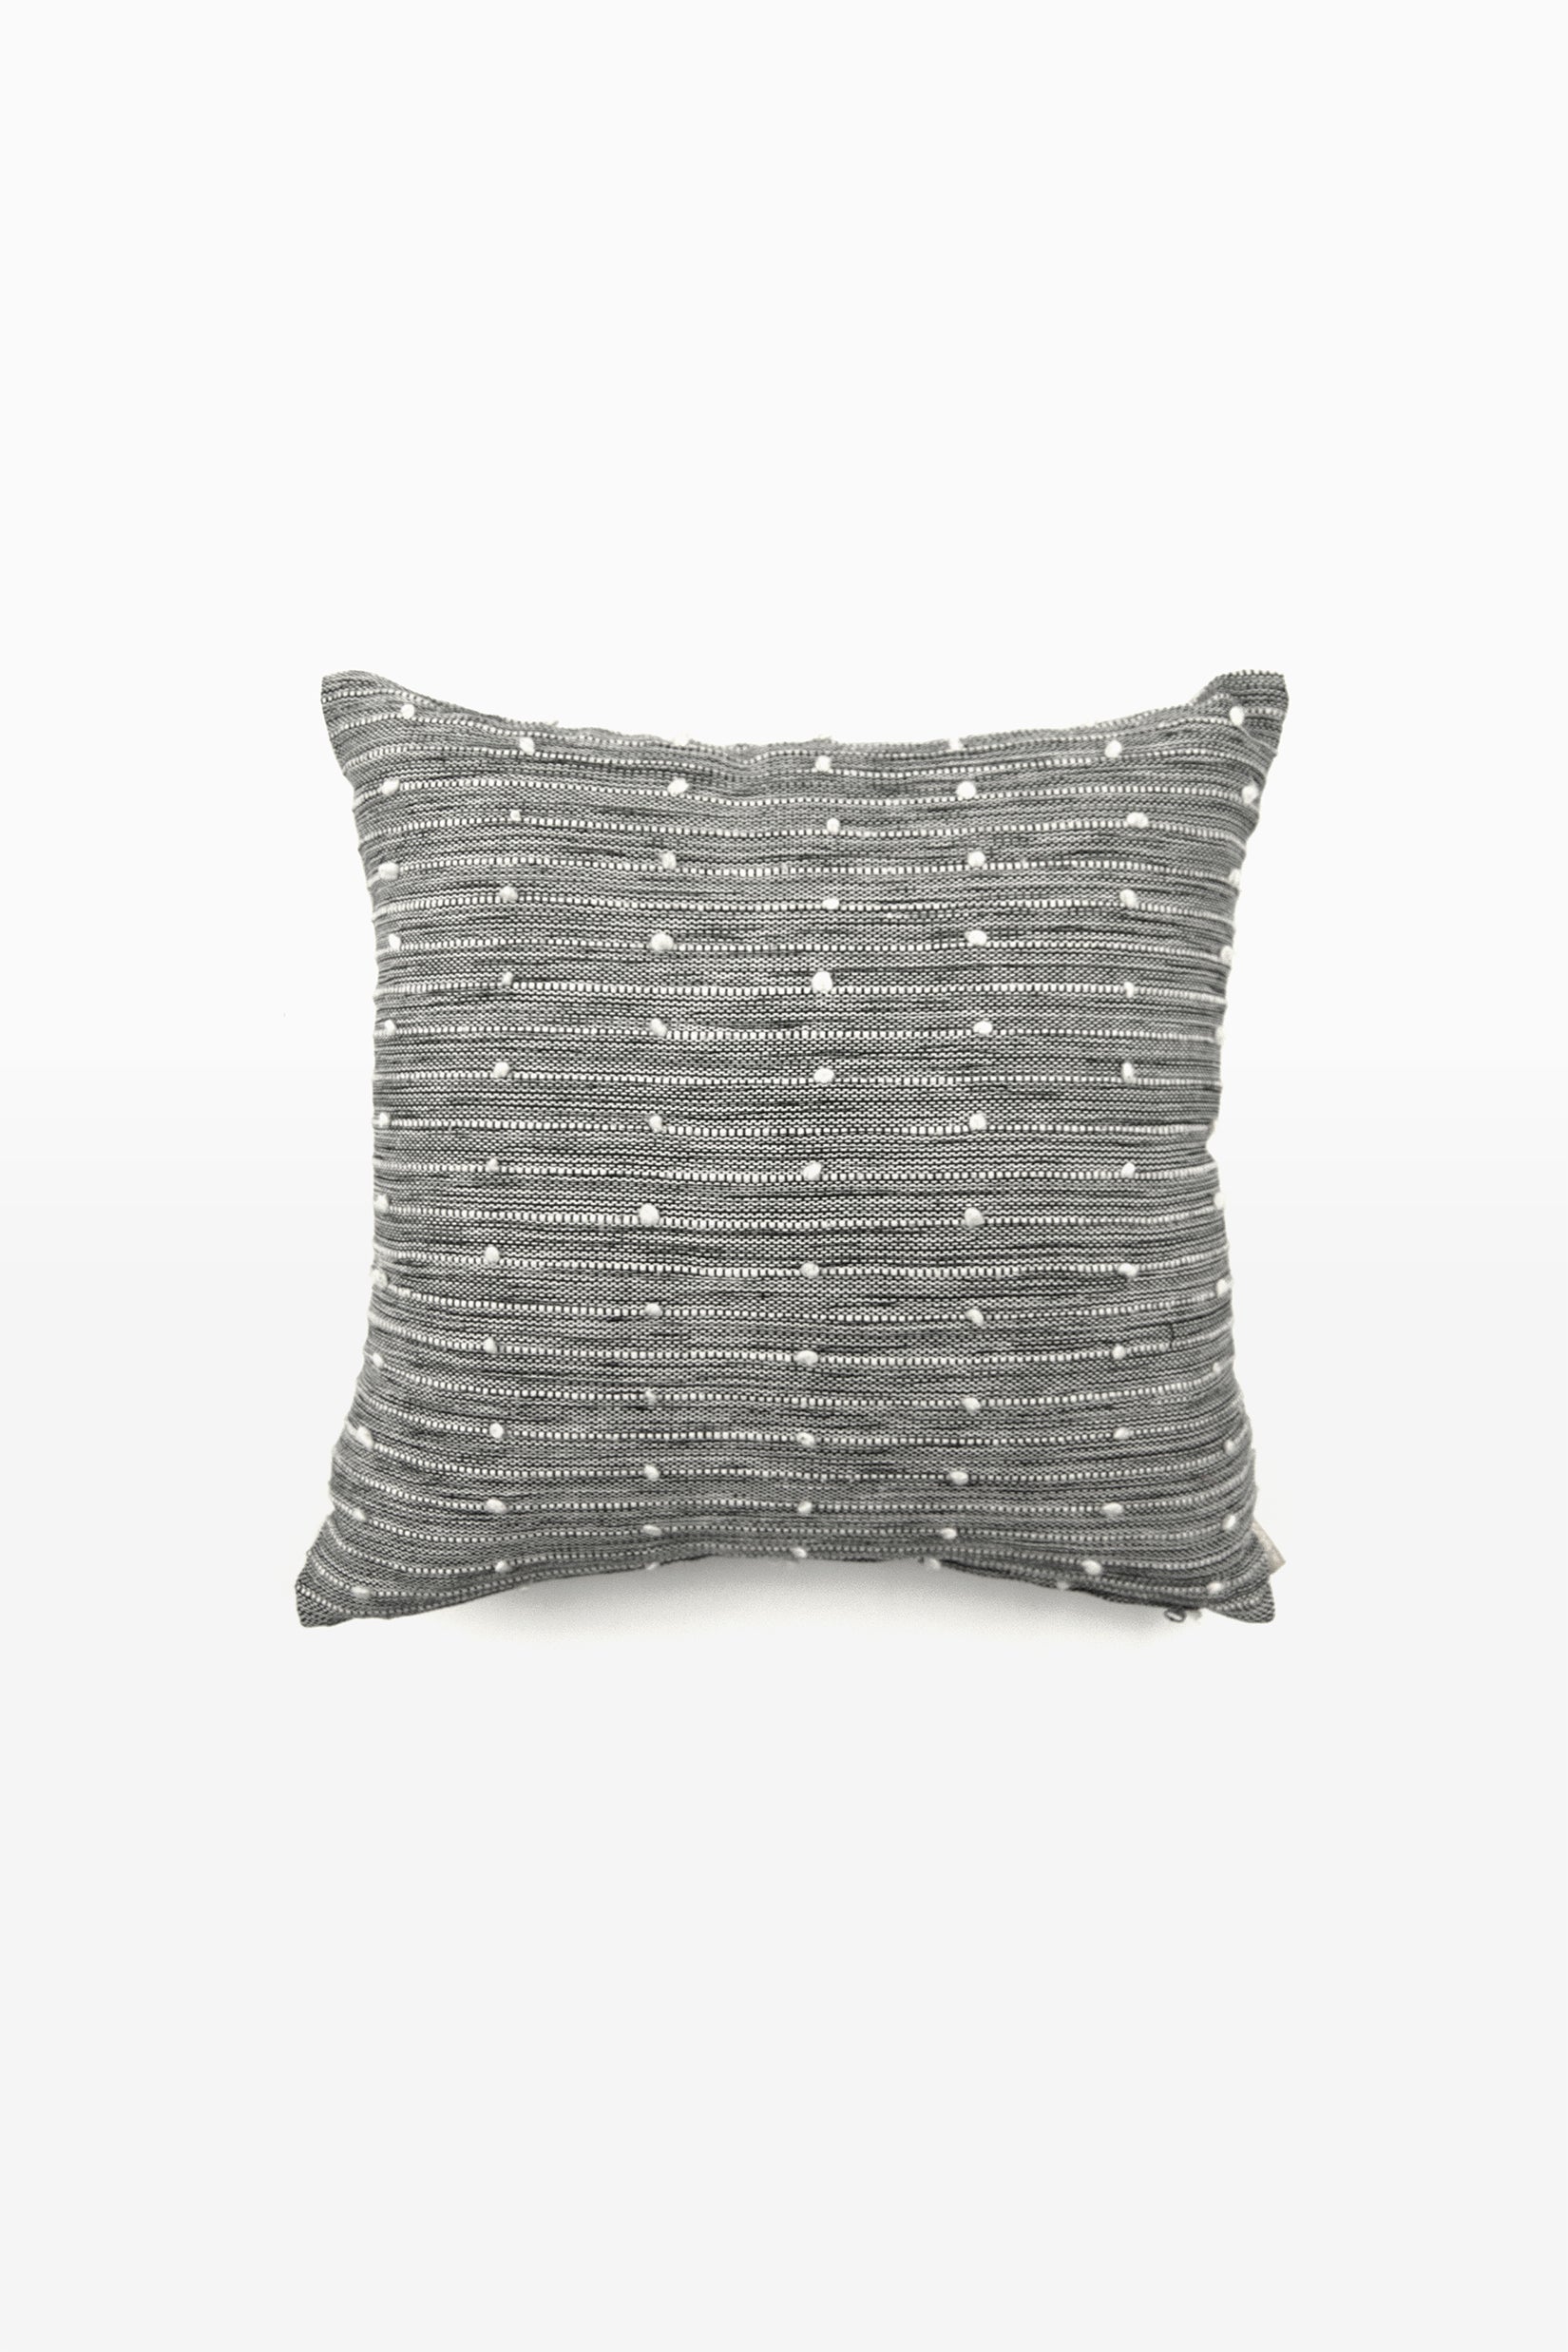 Square black and white woven throw pillow with small white pom pom accents